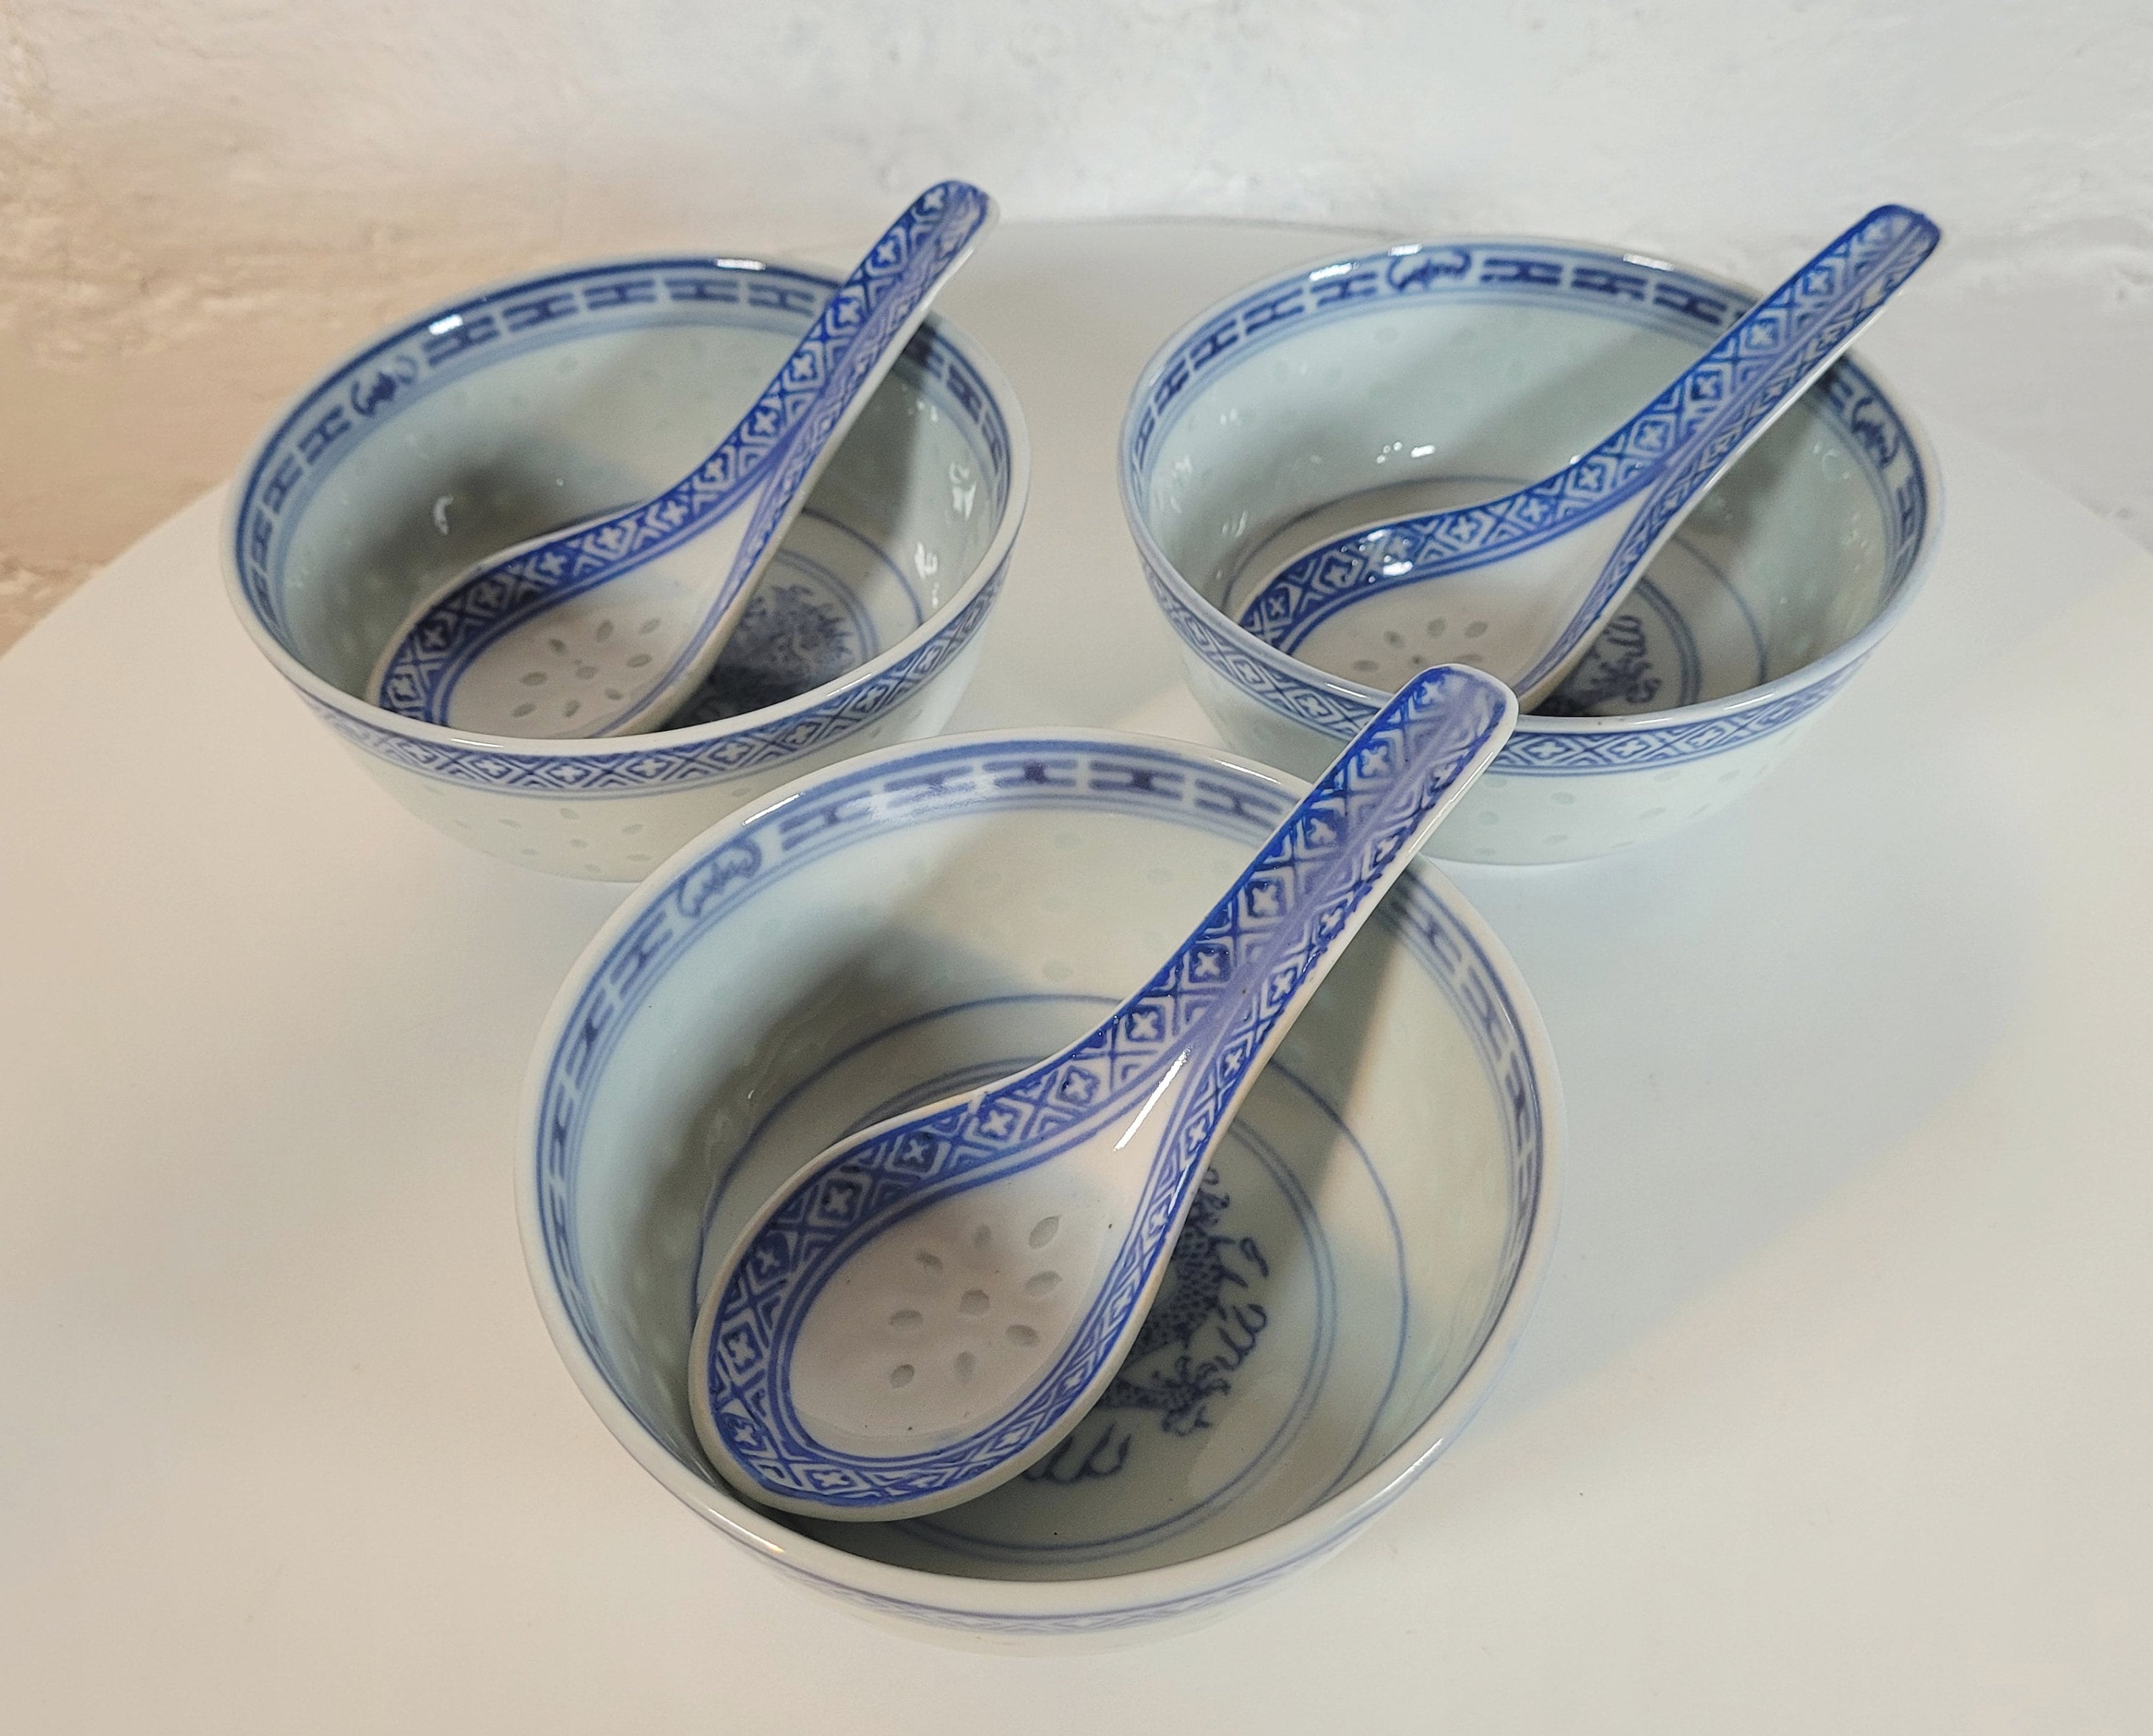 Three Vintage Chinese Soup Bowls With Spoons / Blue and White Rice